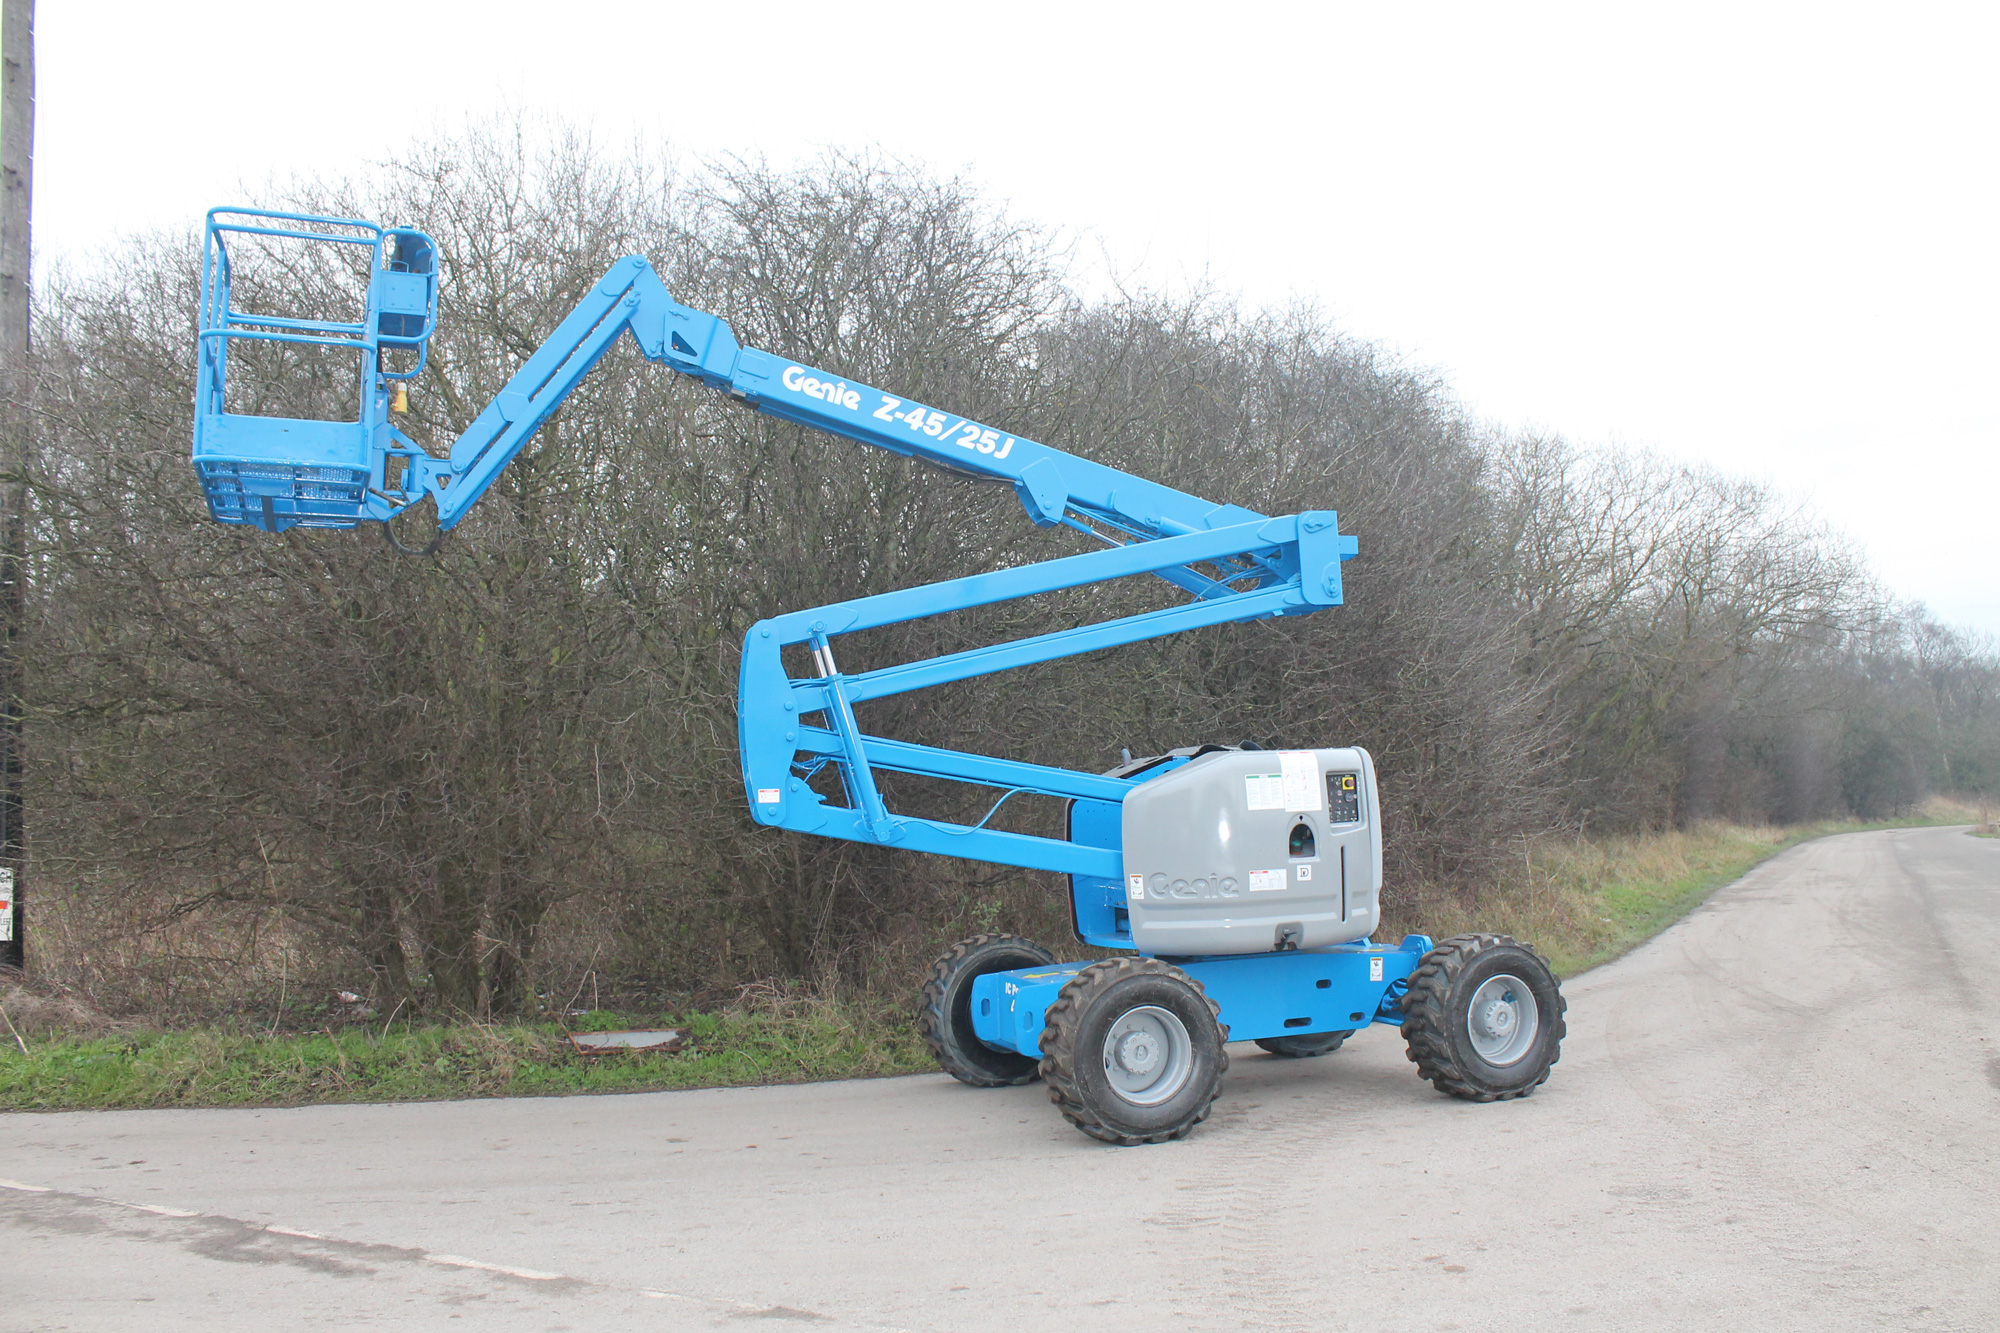 Genie Z45/25J Articulating Boom Lift For Sale, 50% OFF